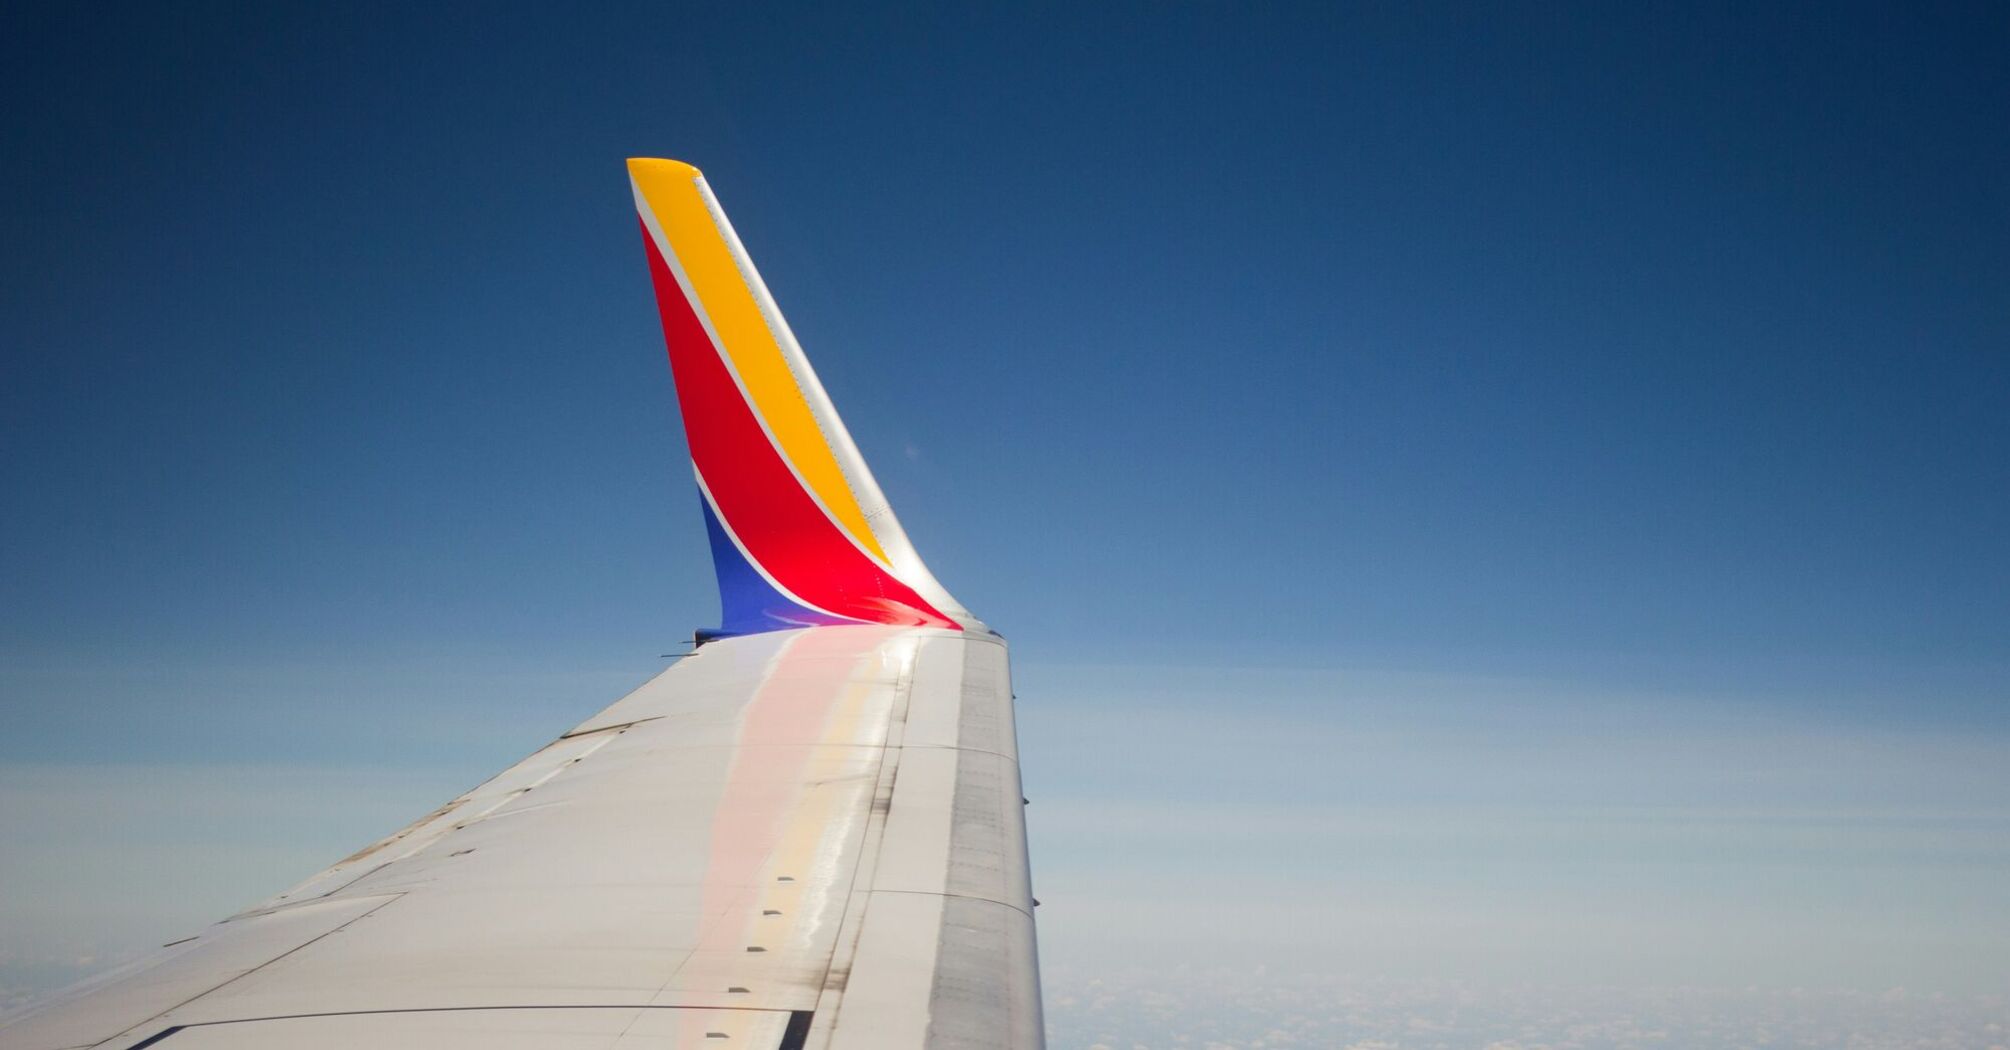 Wing of a Southwest Airlines plane in flight against a clear blue sky